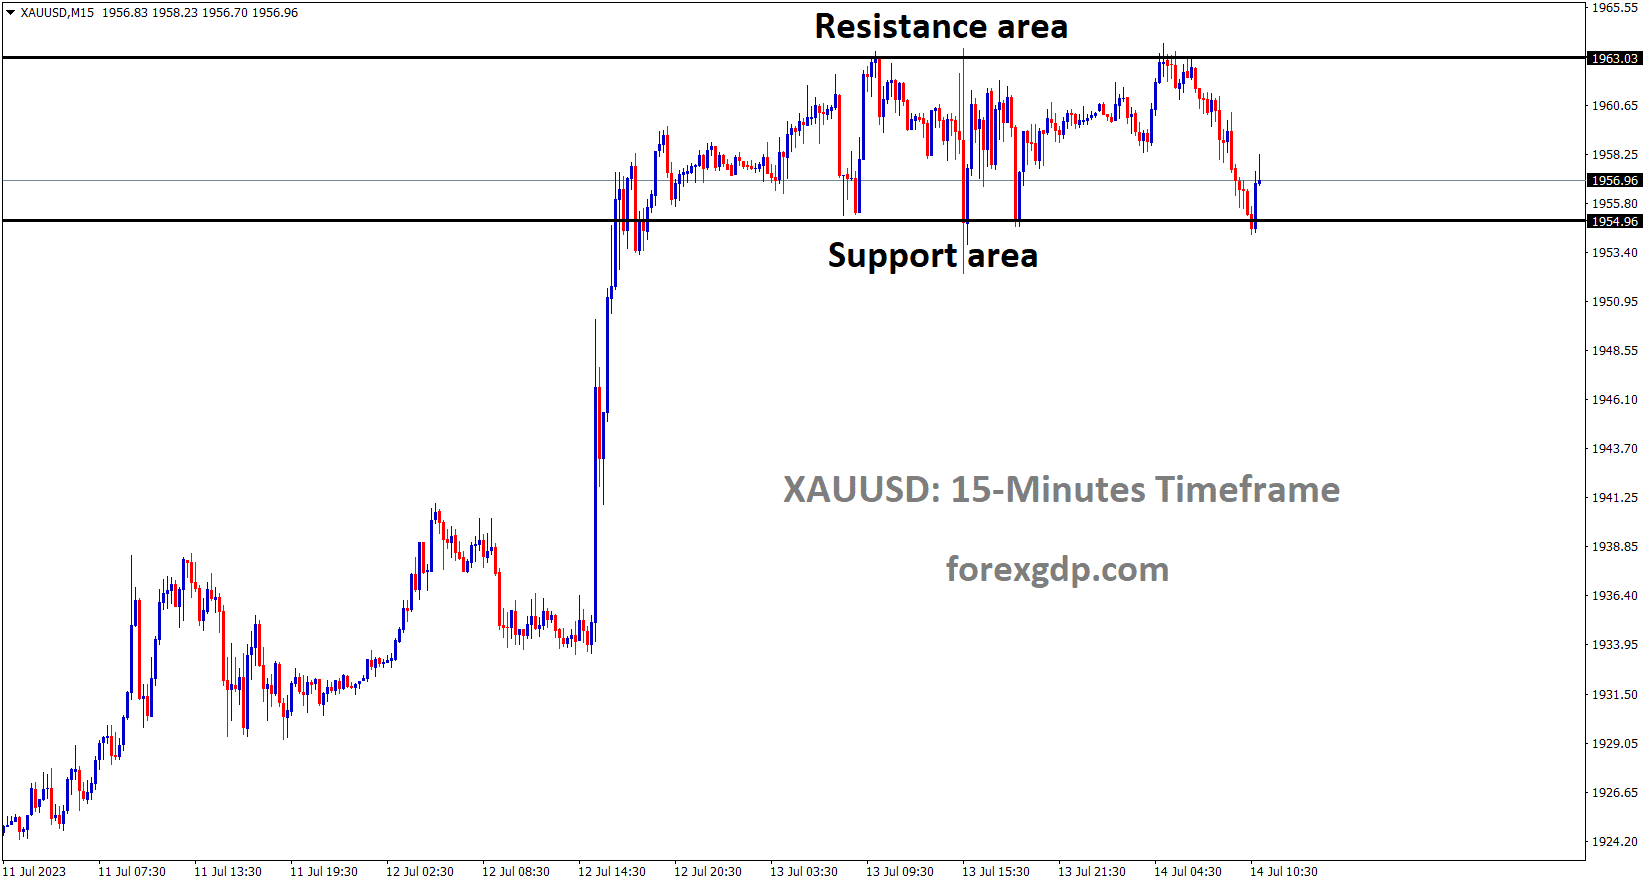 XAUUSD Gold price is moving in the Box pattern and the market has reached the horizontal support area of the pattern